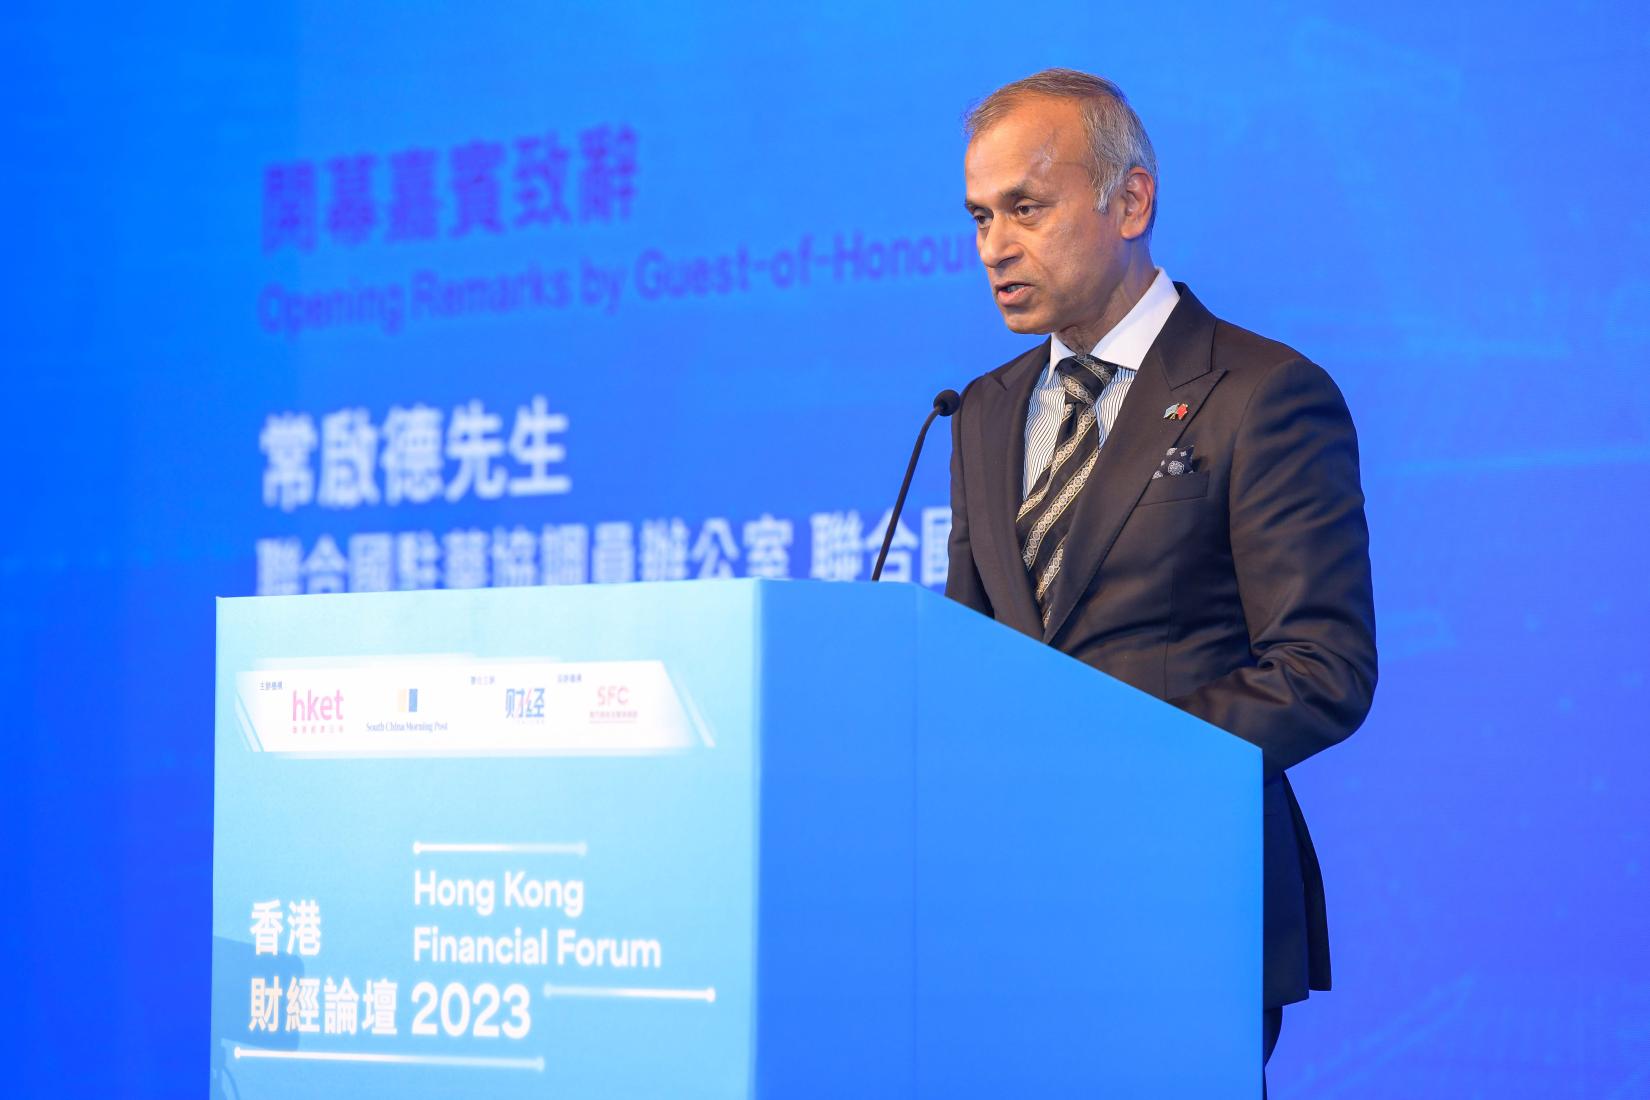 UN Resident Coordinator in China Siddharth Chatterjee at the Hong Kong Financial Forum 2023